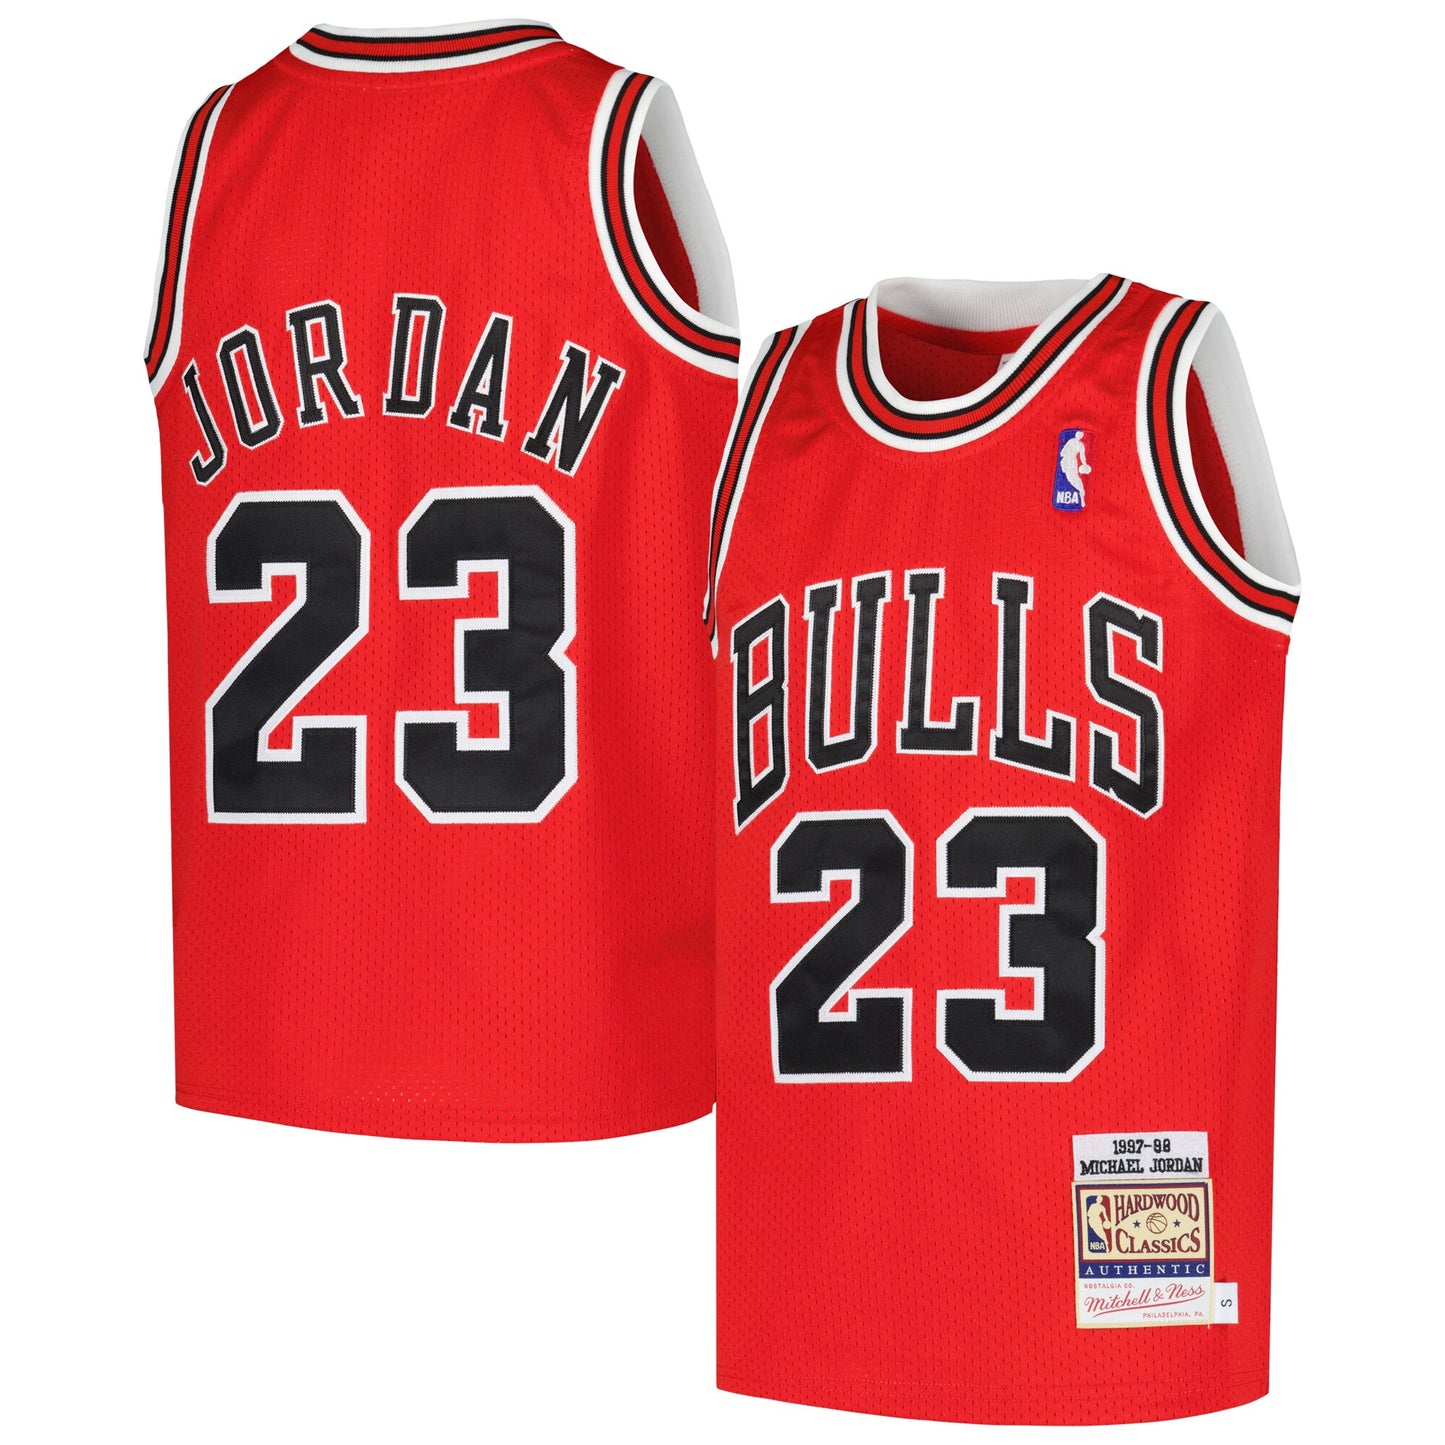 Michael Jordans Chicago Bulls Mitchell & Ness Youth Hardwood Classics 1997-98 Authentic Jersey - Red